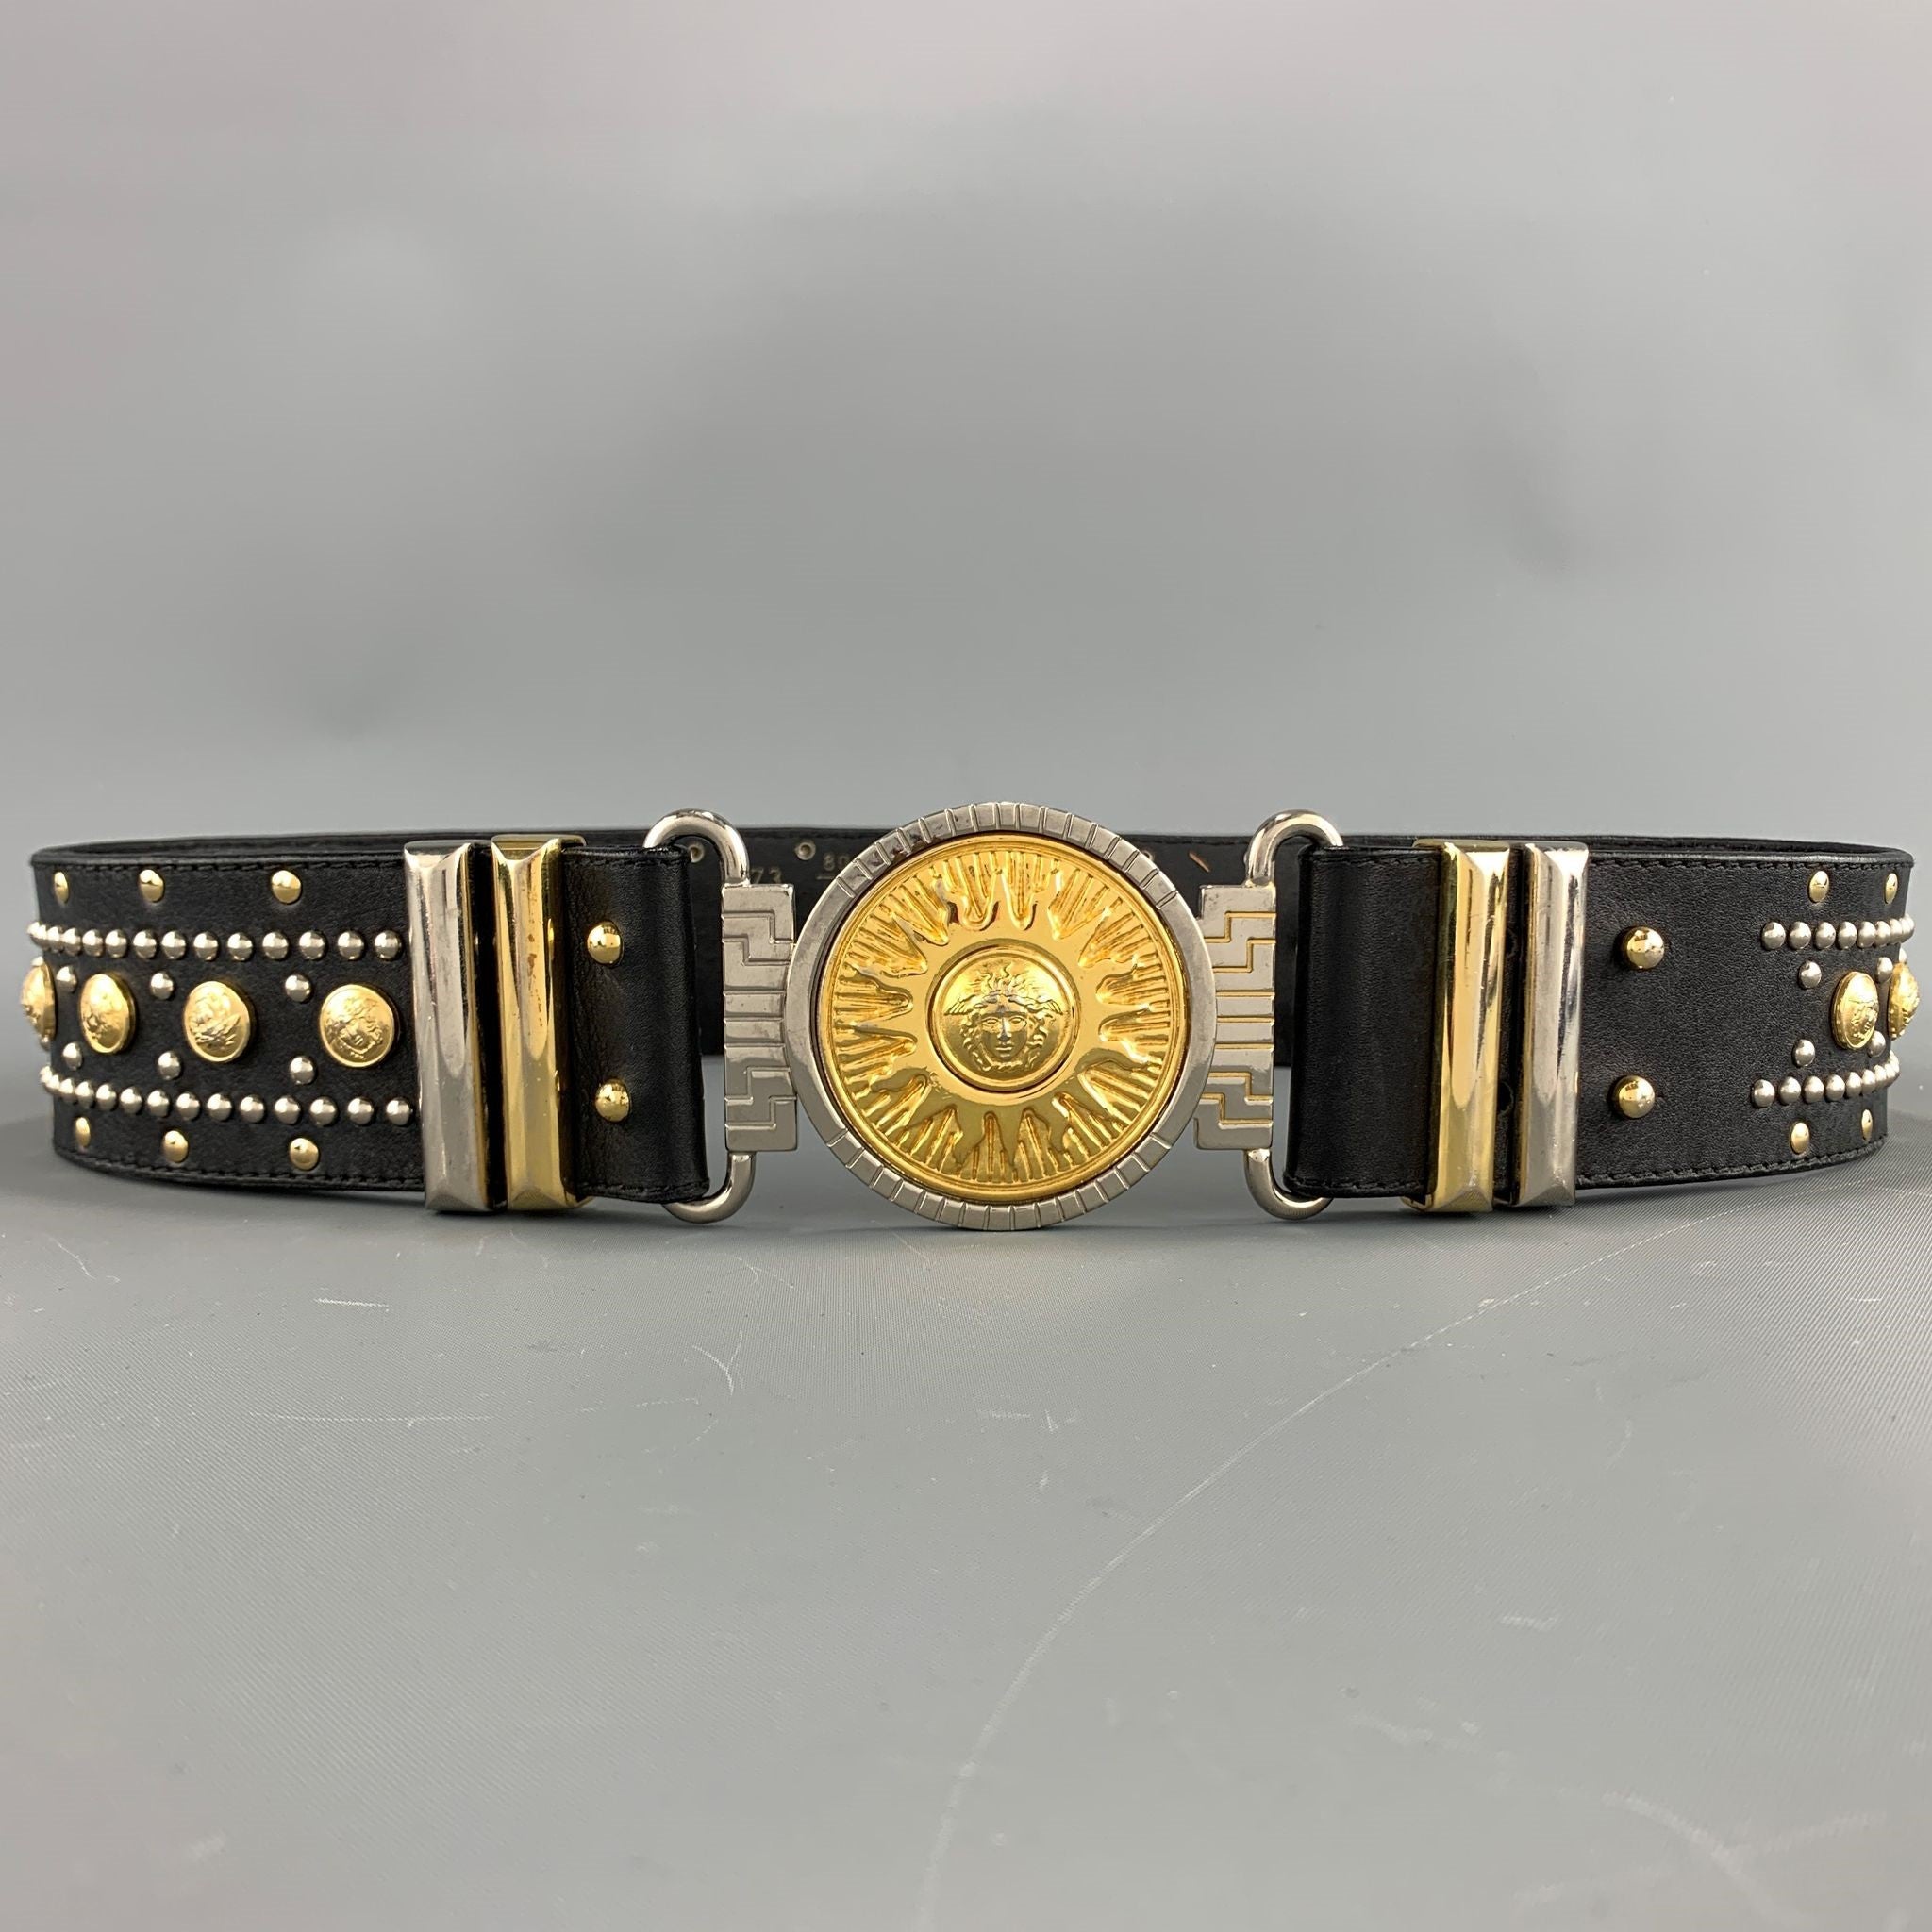 Versace - Authenticated Belt - Leather Black for Men, Good Condition